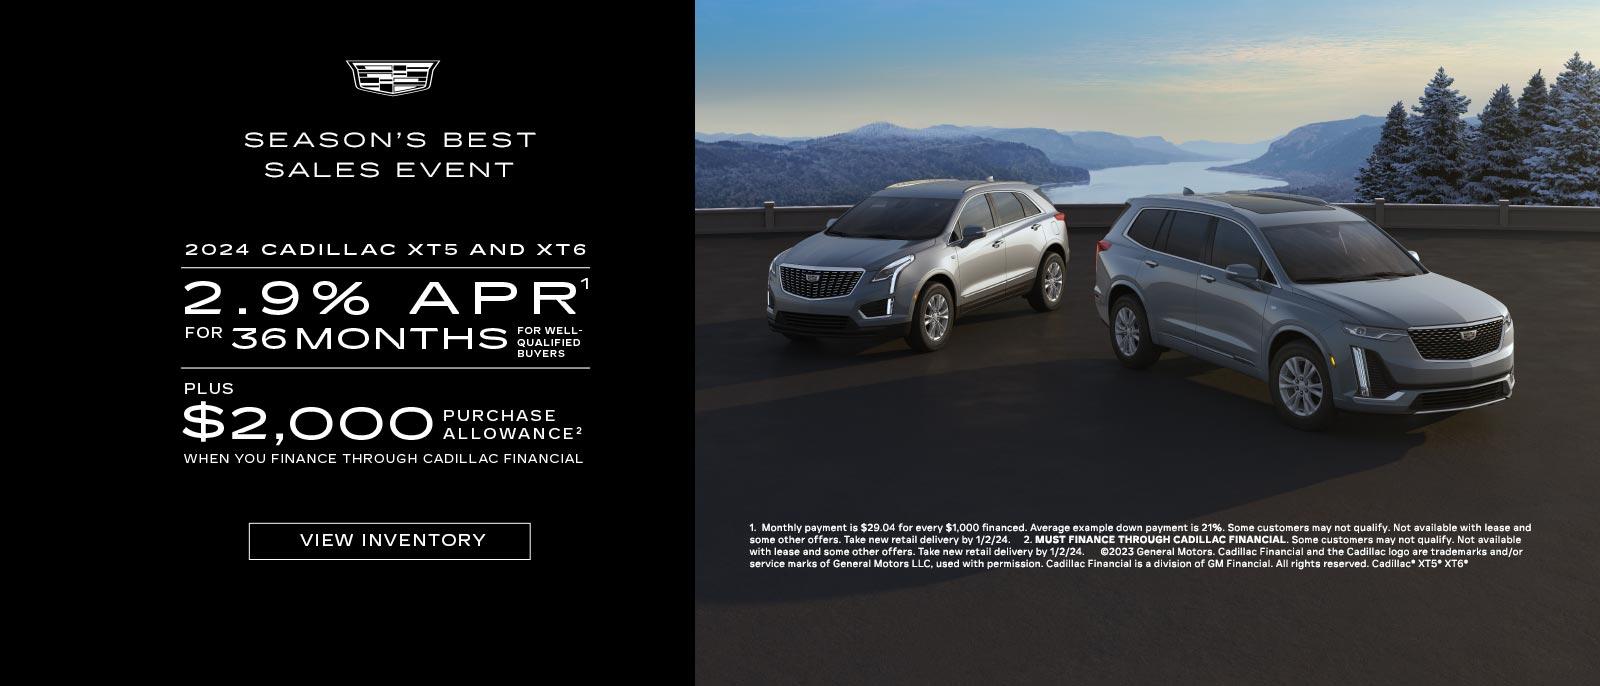 2024 CADILLAC XT5 AND XT6. 2.9% APR for 36 months for well qualified buyers. Plus $2,000 PURCHASE ALLOWANCE WHEN YOU FINANCE THROUGH CADILLAC FINANCIAL.